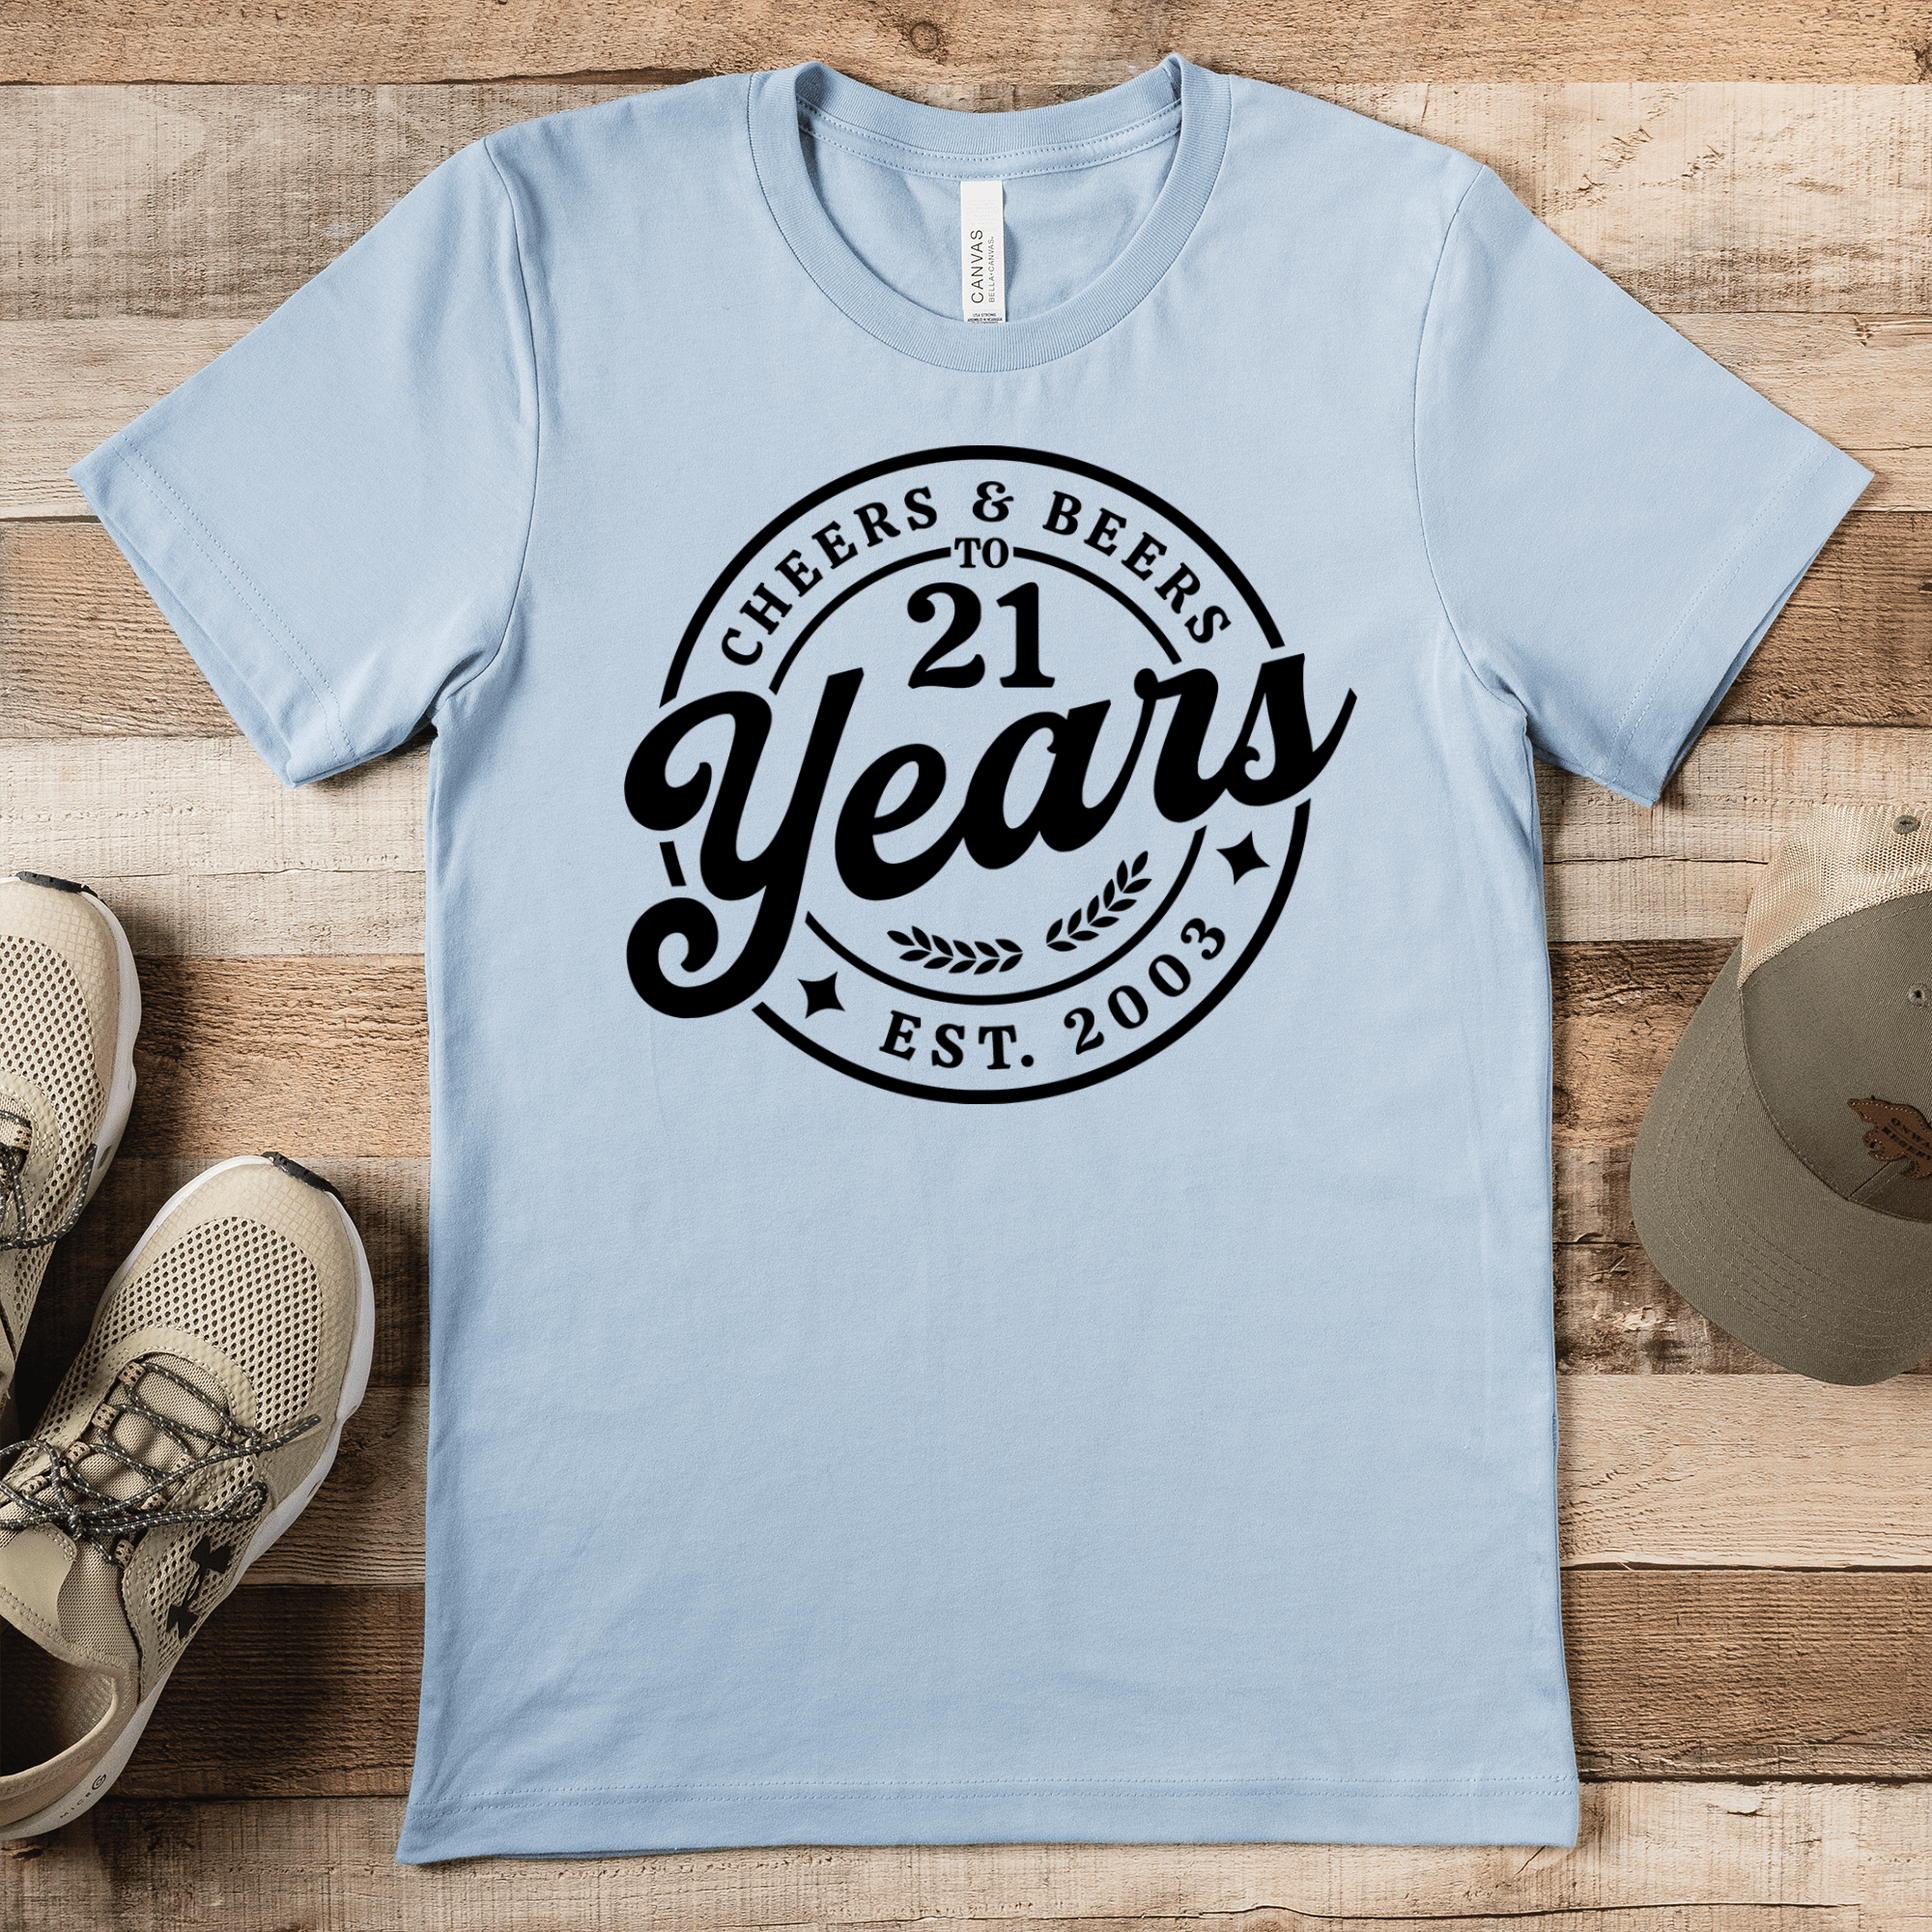 Mens Light Blue T Shirt with Beers-N-Cheers-21 design